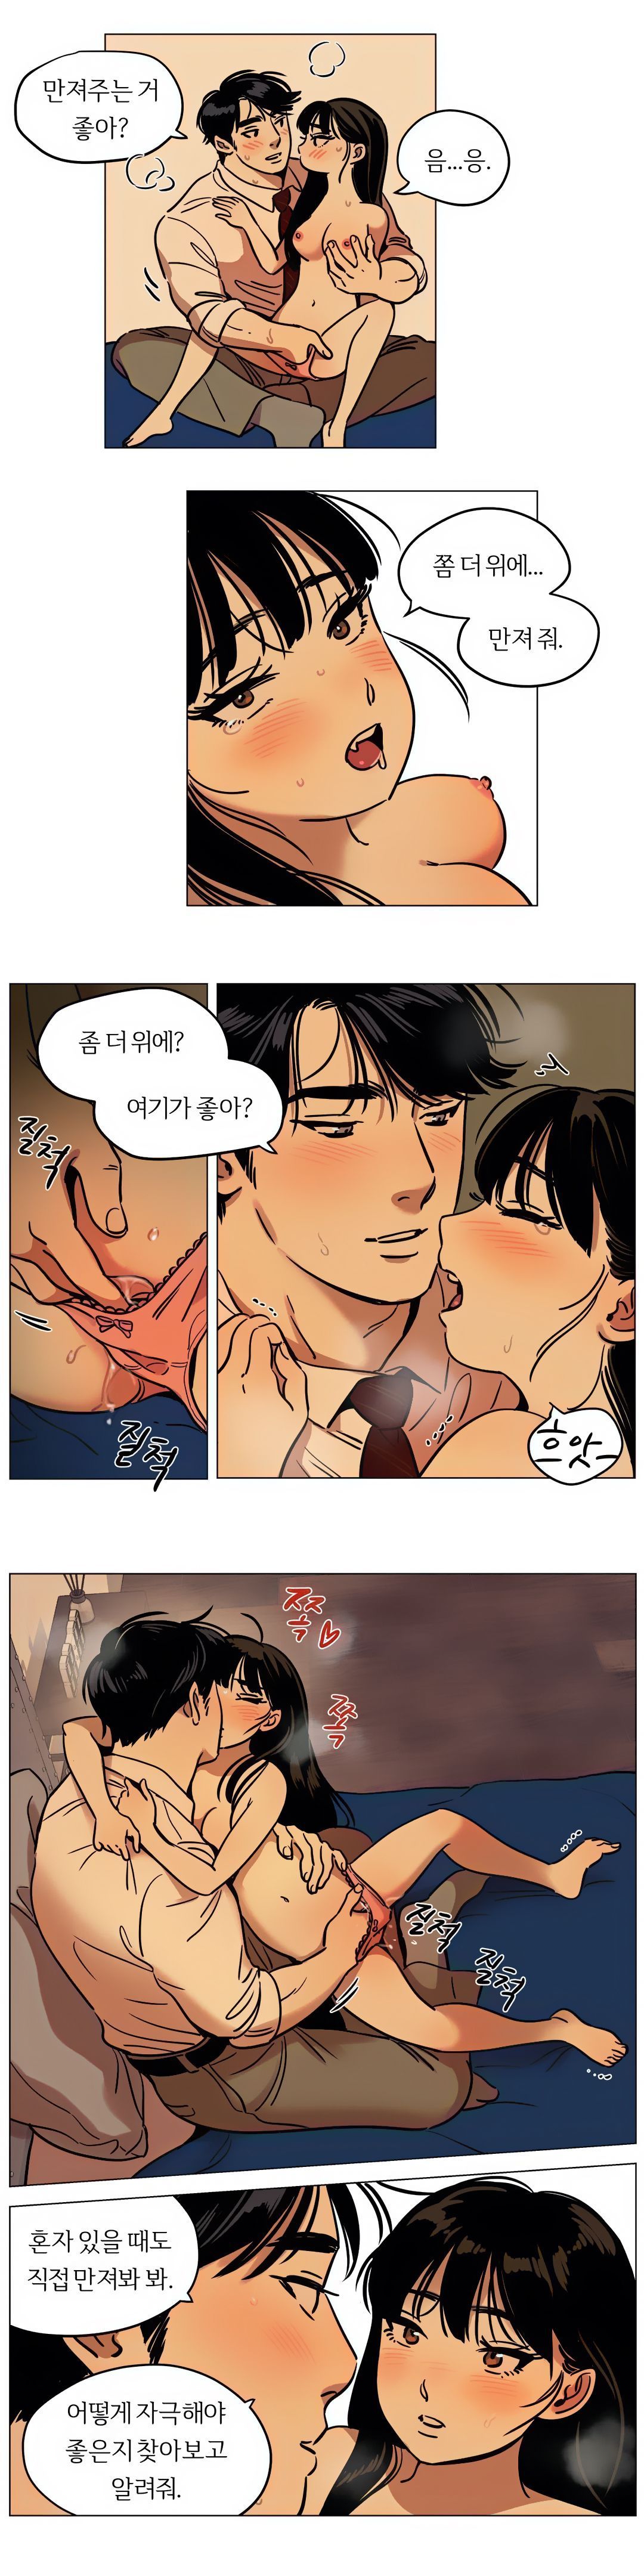 Snowman Raw - Chapter 15 Page 4